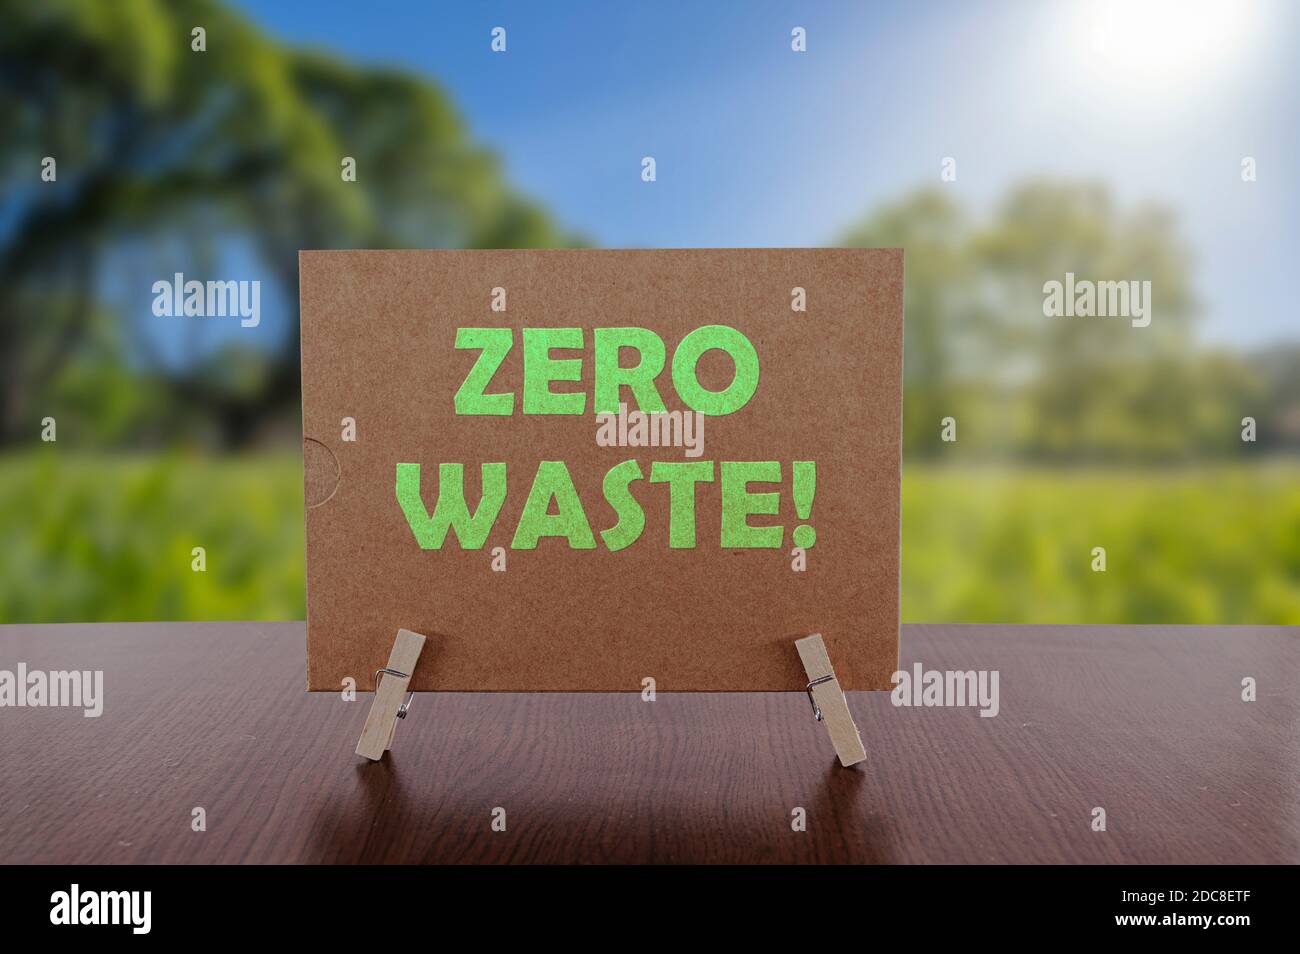 Zero waste text on card on the table with sunny green park background. Ecology concept, recycle, reuse, reduce waste. Stock Photo